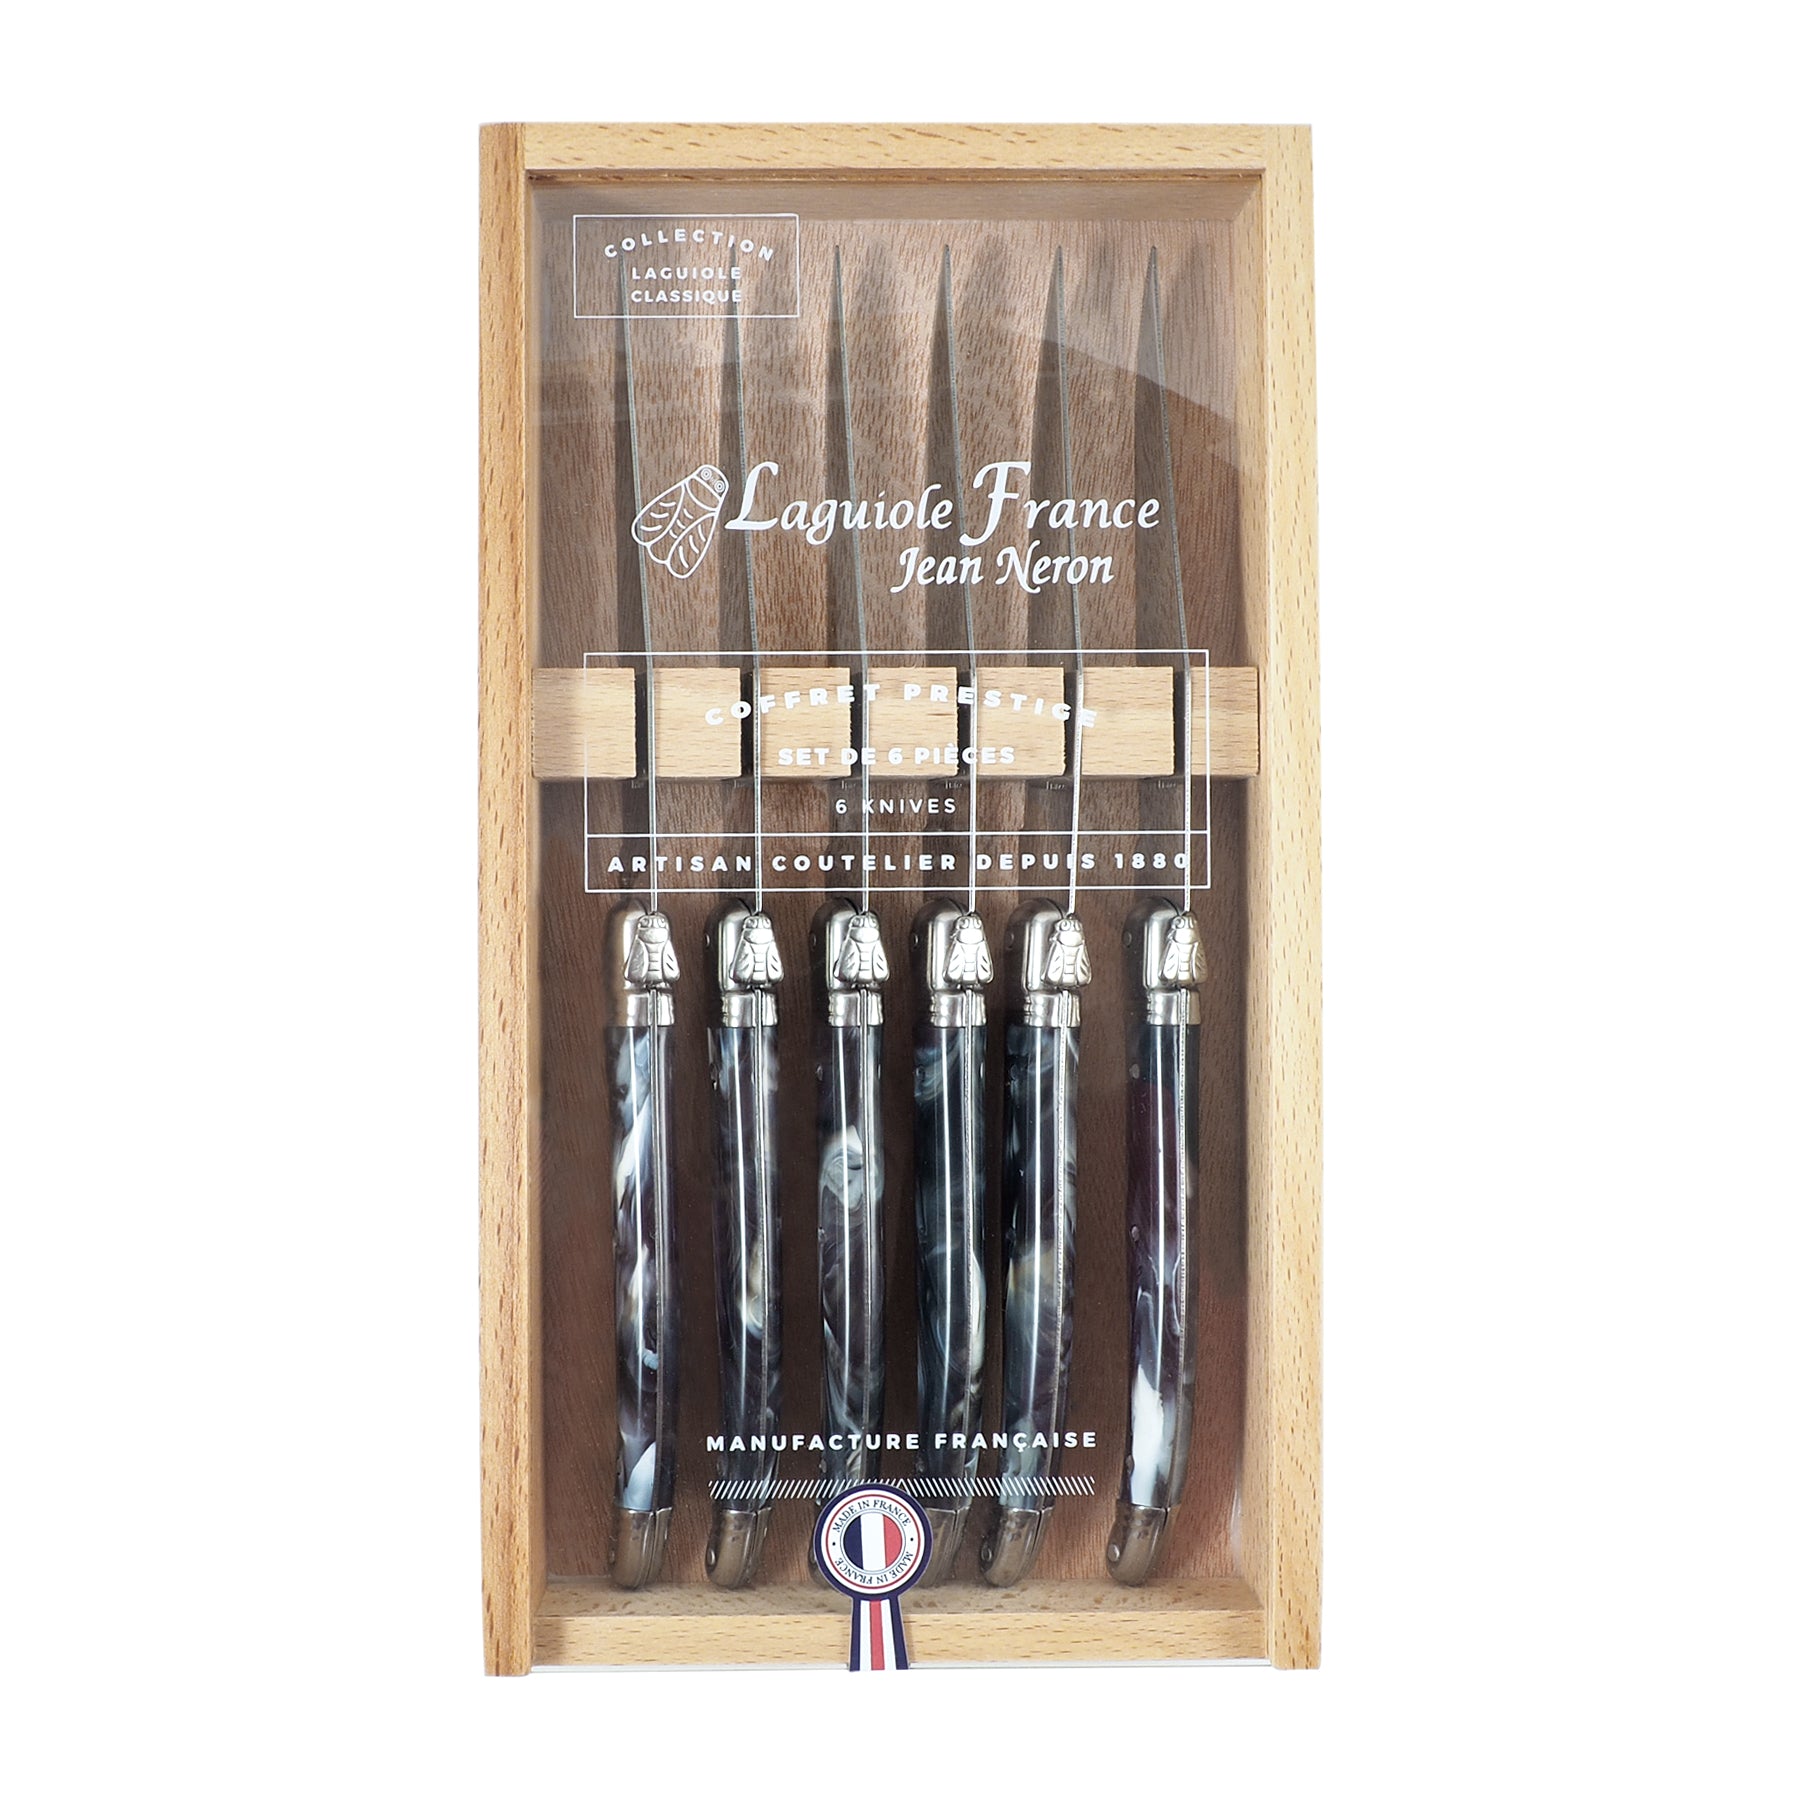 Laguiole Black Marble Knives in Wooden Box with Acrylic Lid (Set of 6) Cutlery Laguiole Brand_Laguiole Kitchen_Dinnerware Kitchen_Kitchenware Knife Sets Laguiole Spring Collection 7900-54000_BM_AL-Laguiole-Black-Marble-Knives-in-Wooden-Box-with-Acrylic-Lid-_Set-of-6